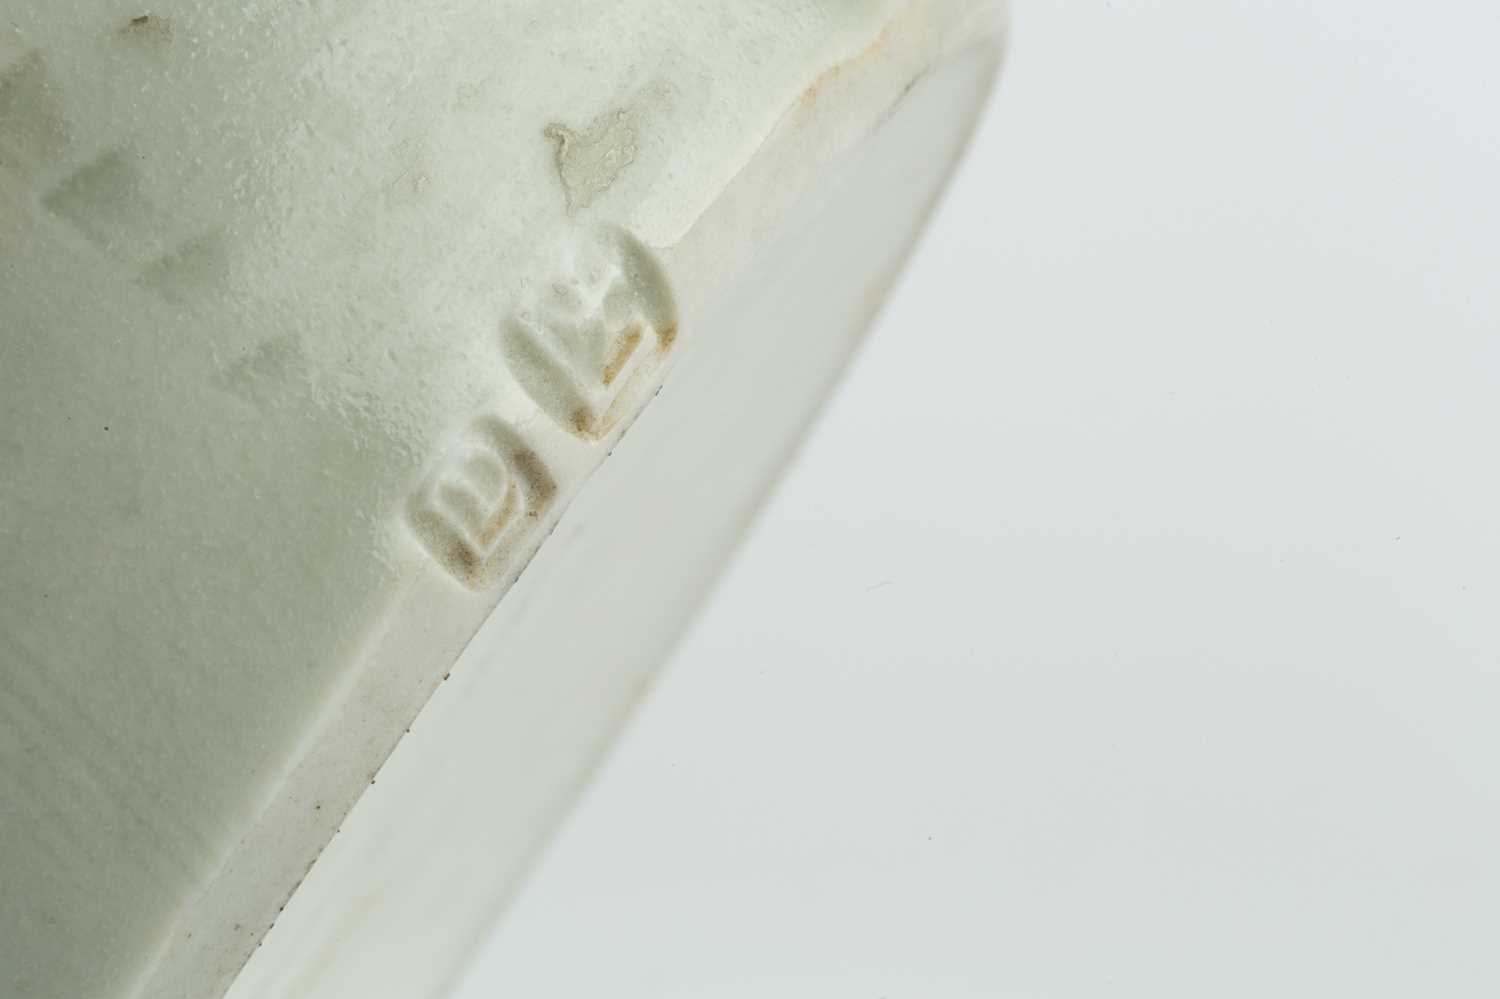 David Leach (1911-2005) at Lowerdown Pottery Pot and cover celadon glaze with vertical combed line - Image 3 of 3